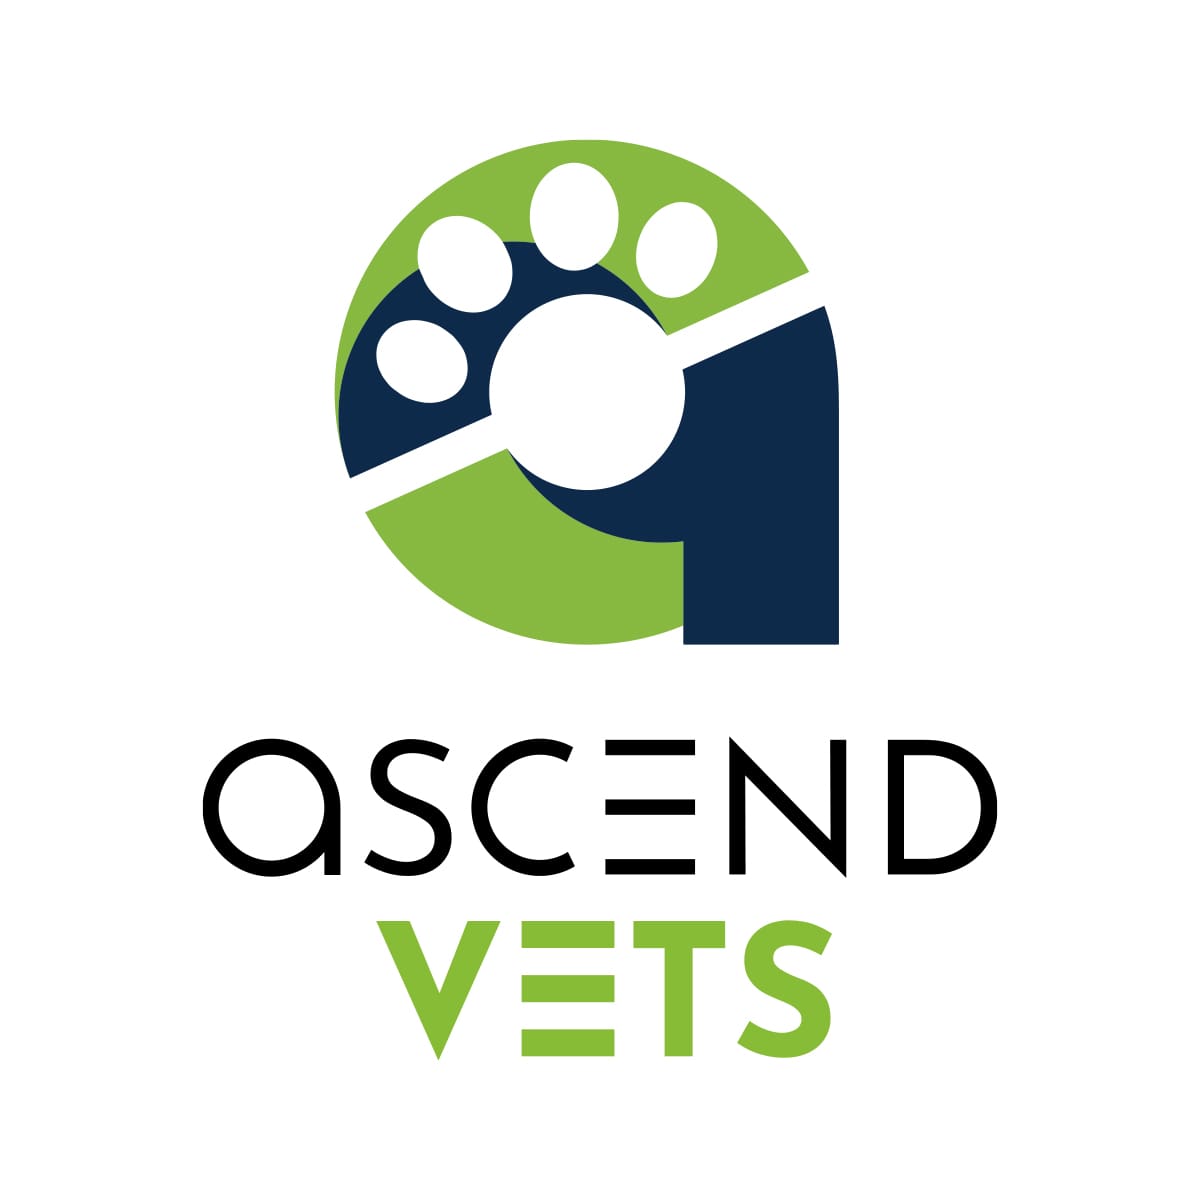 <span style="font-size: 21px;"><strong>Ascend Vets</strong></span><br>
Logo design